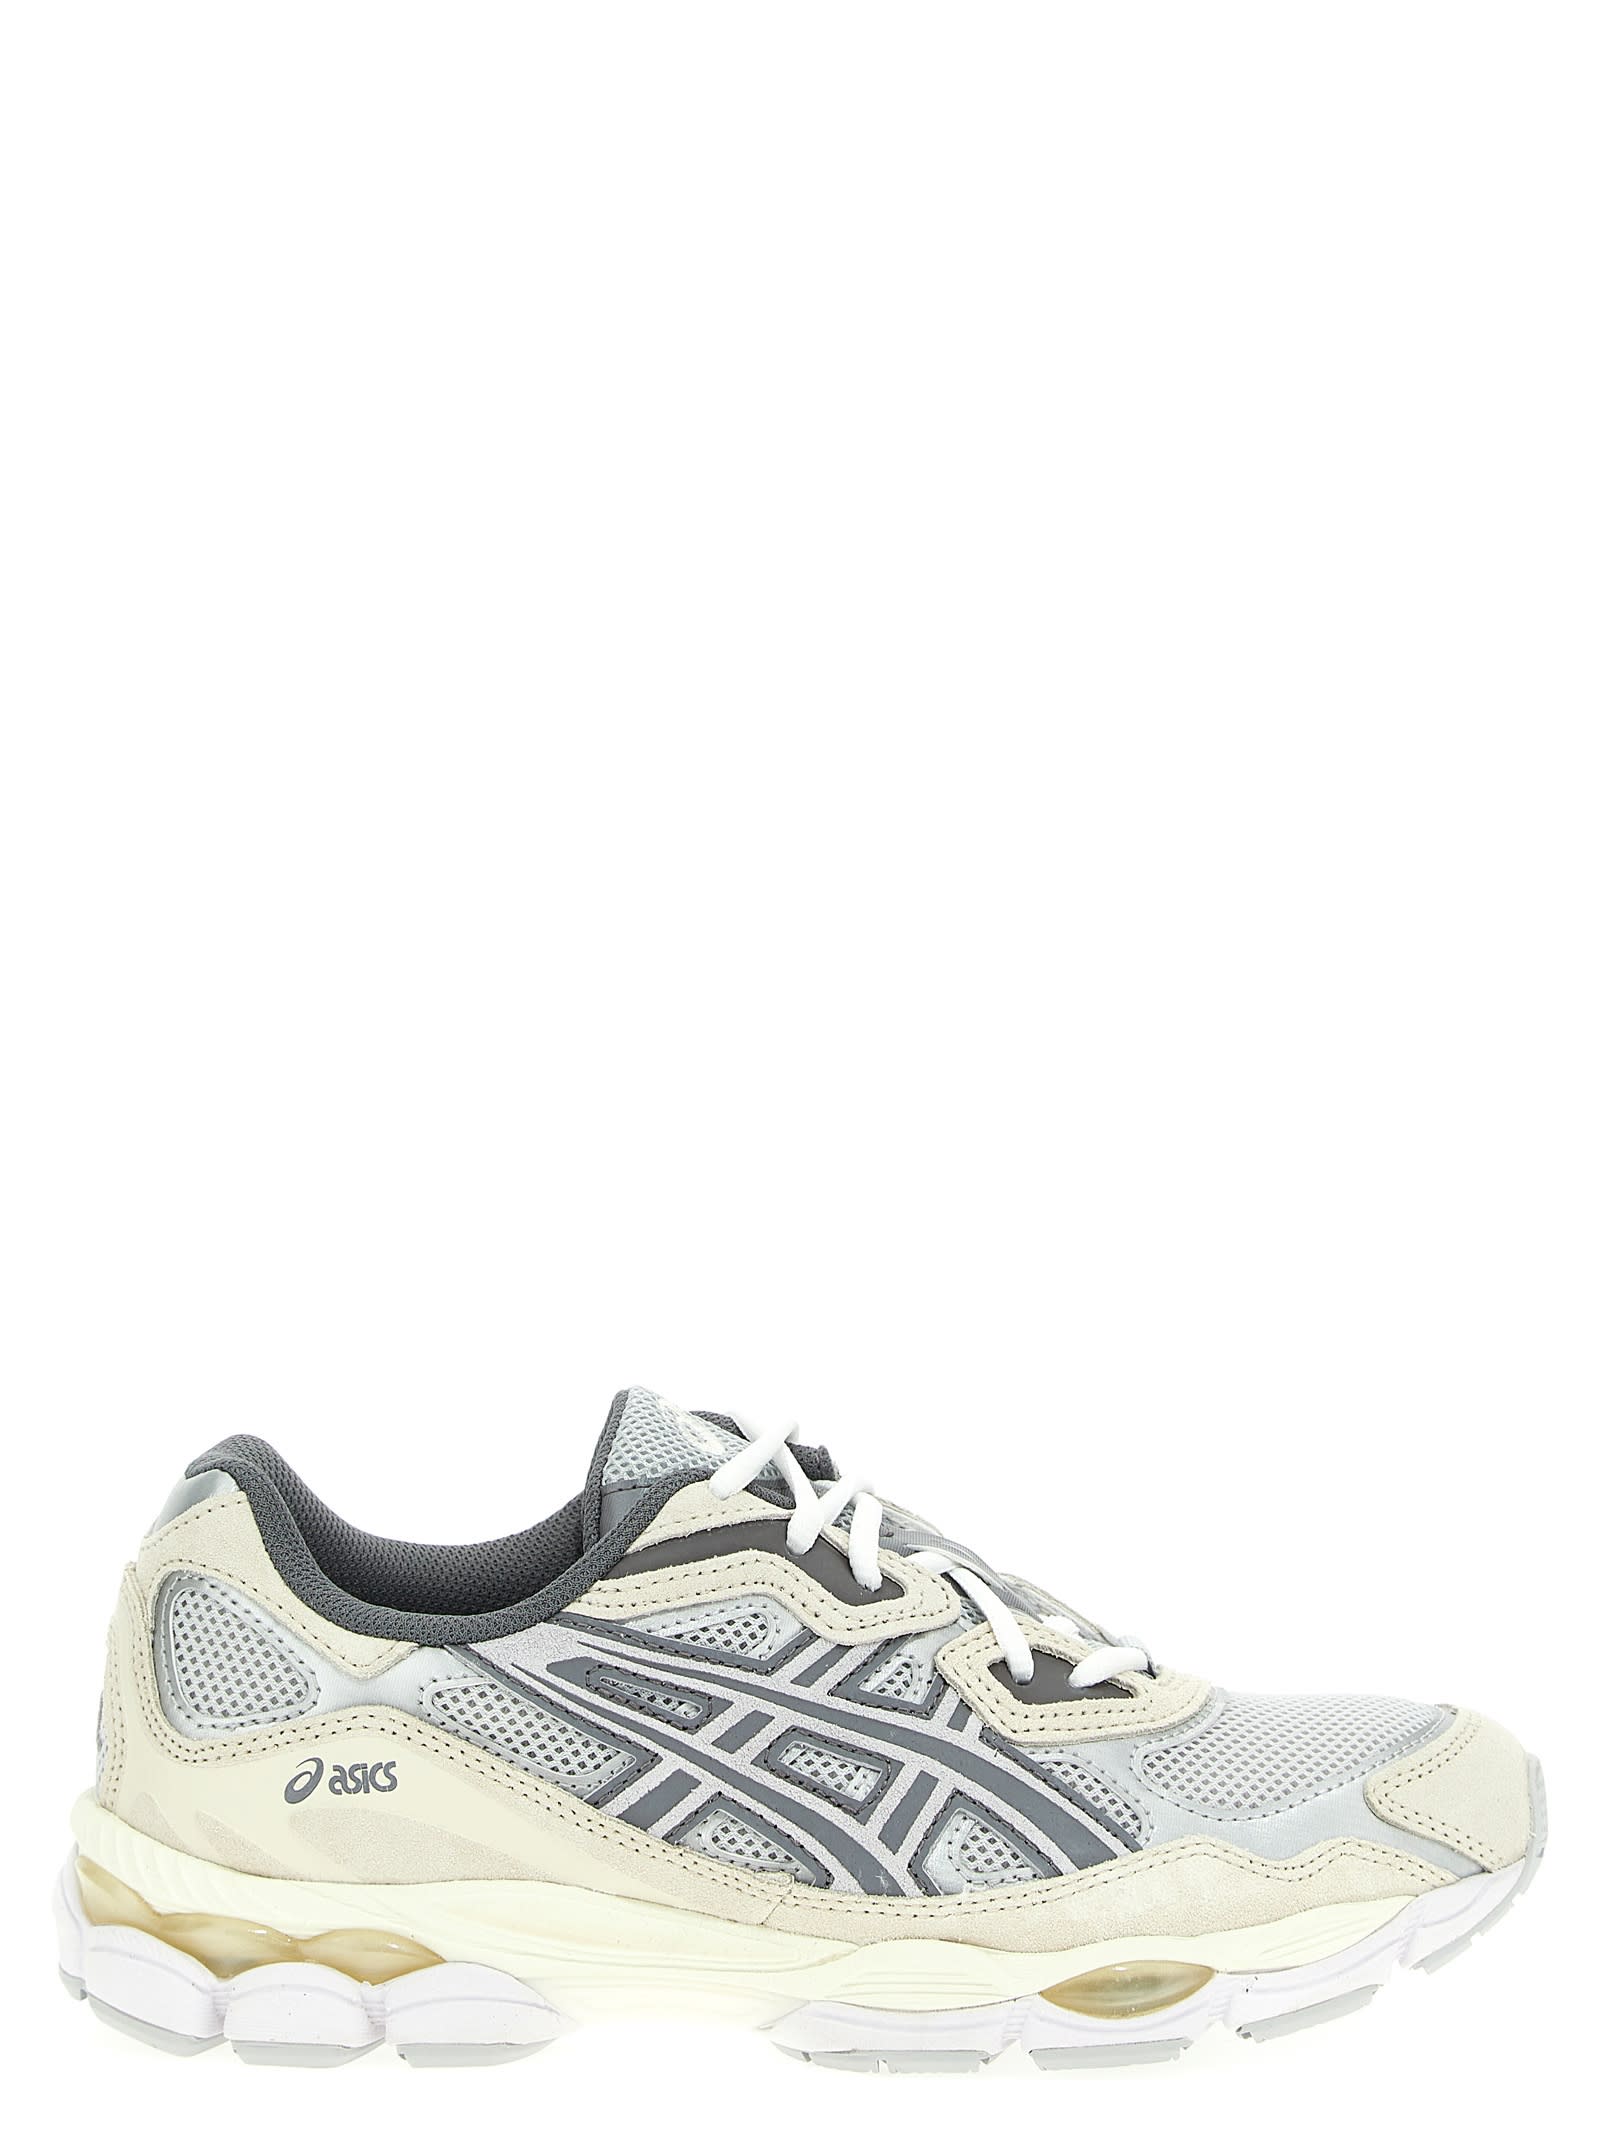 Shop Asics Gel-nyc Sneakers In Concrete/oatmeal